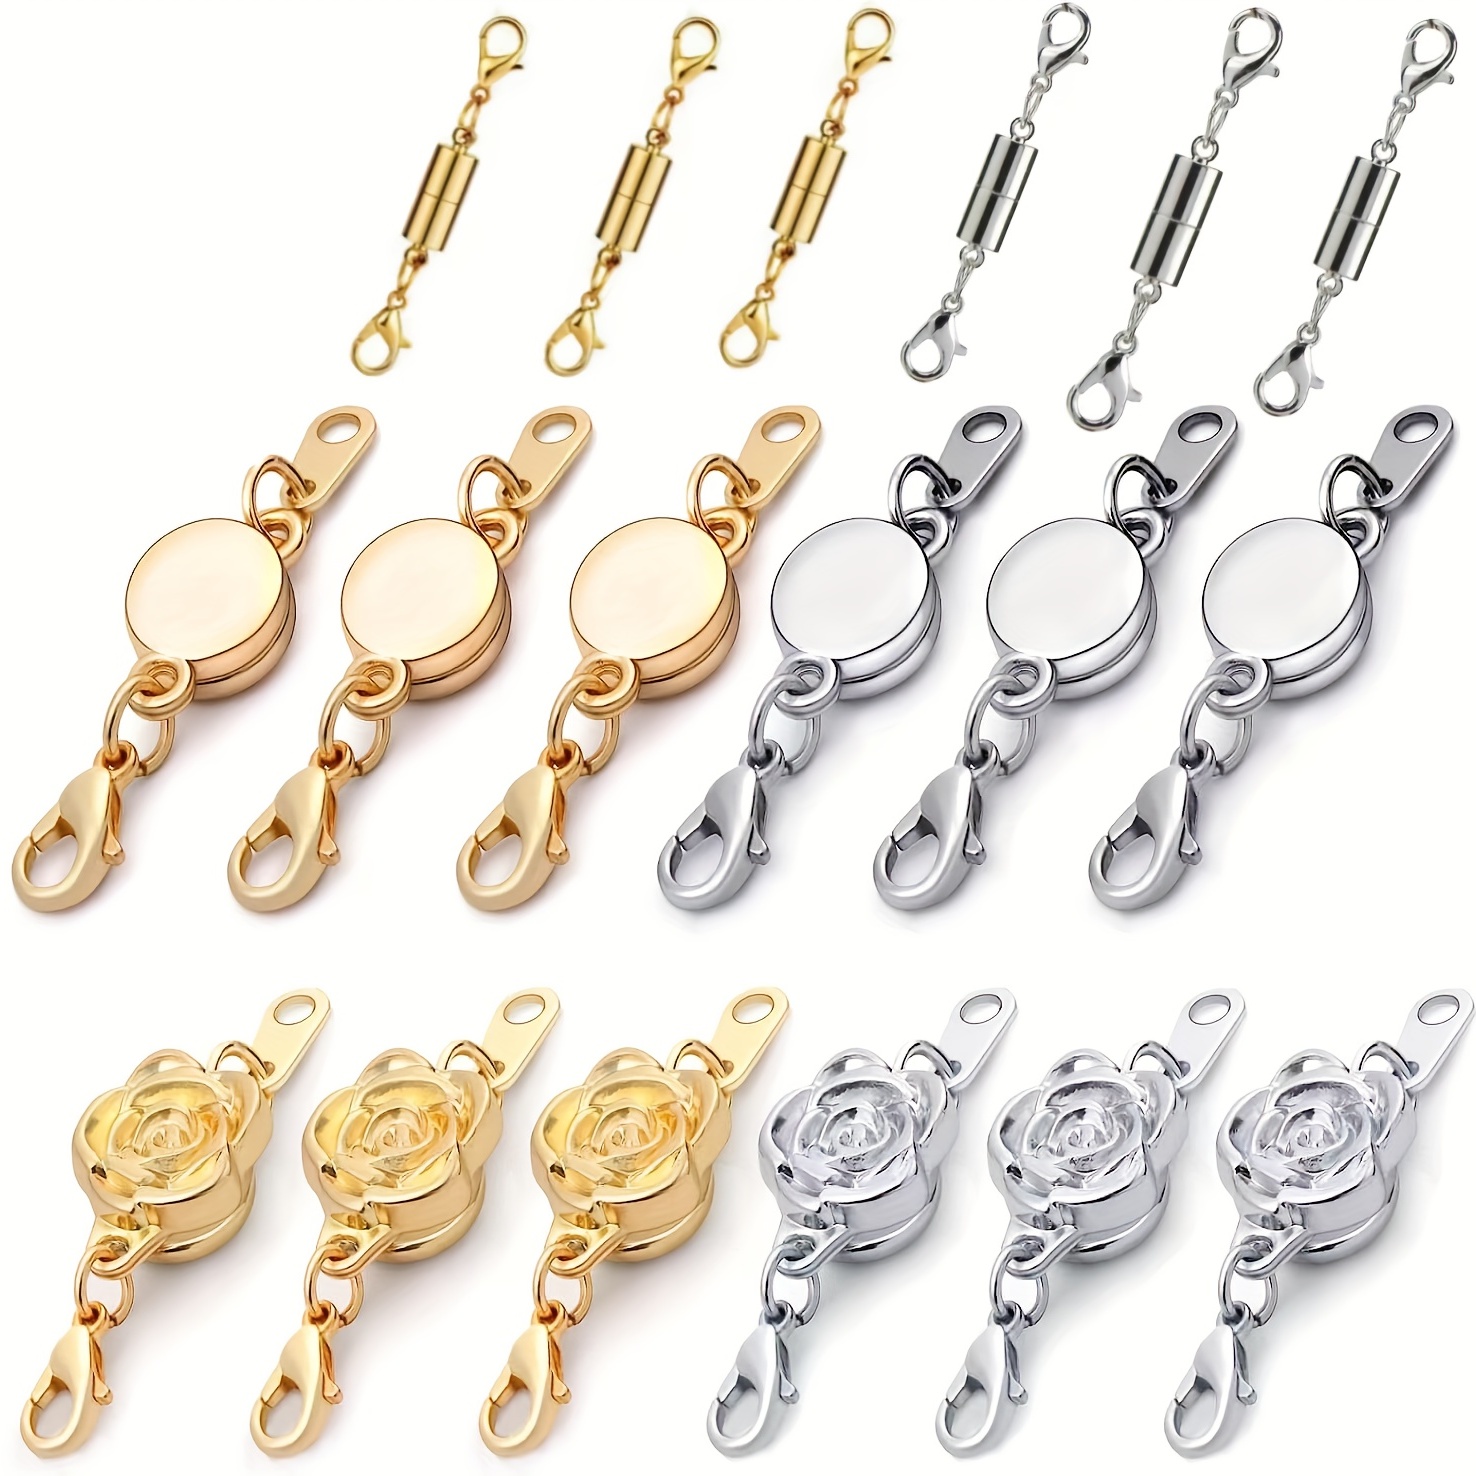  5Pcs Gold Stainless Steel Necklace Extender Chain Necklace  Extenders for Bracelet Anklet Stainless Steel Chain Extenders for Jewelry  Making (2in 3in 4in 5in 6in) : Arts, Crafts & Sewing